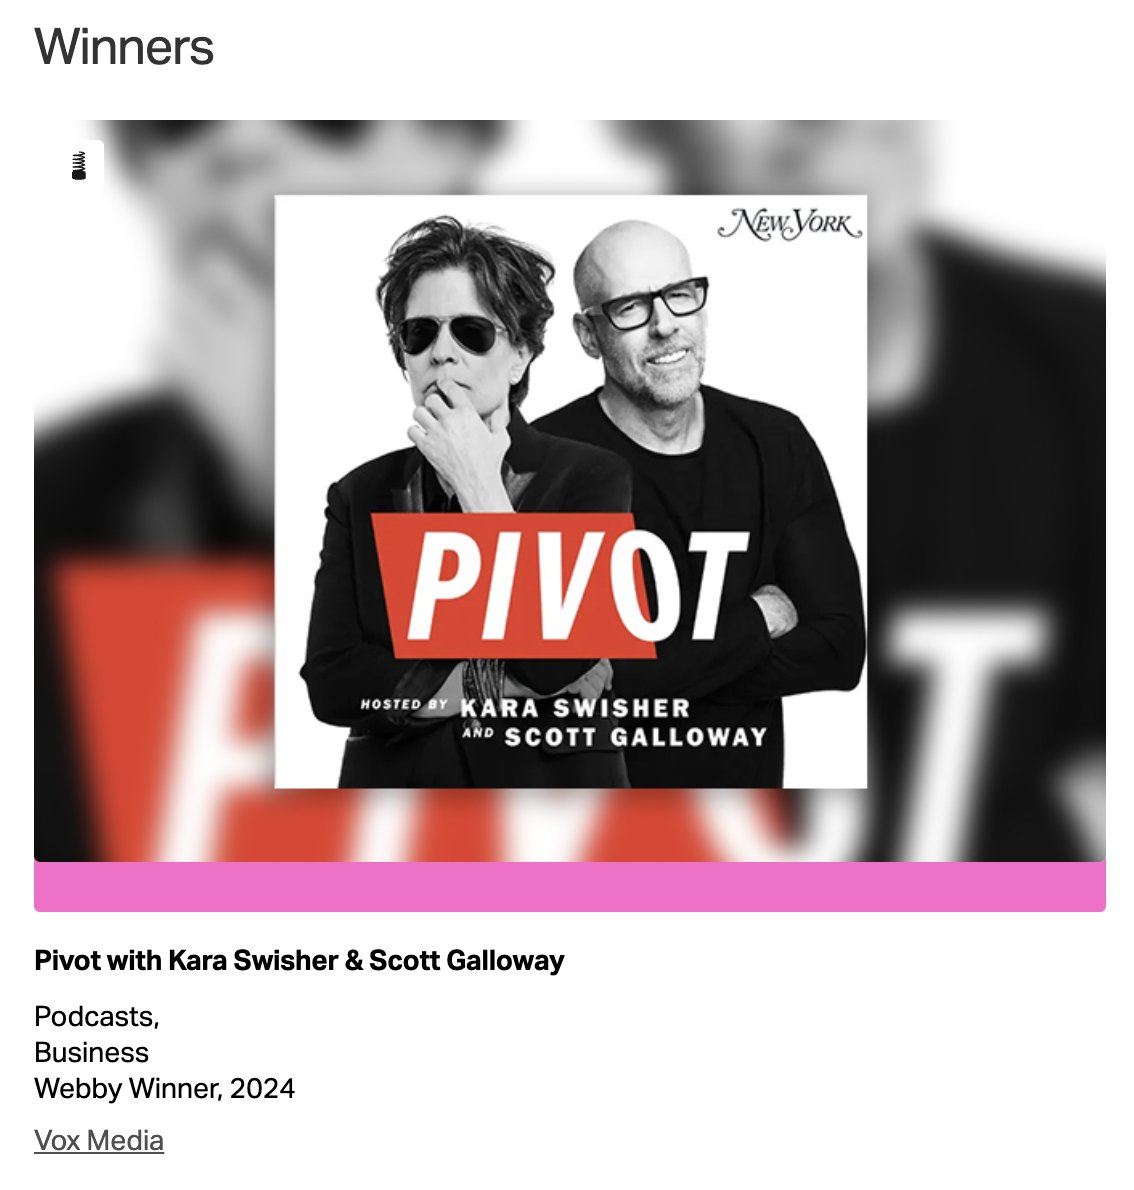 It's official! Pivot won @TheWebbyAwards for Best Business Podcast. Thank you to everyone who voted and to all our loyal listeners out there!